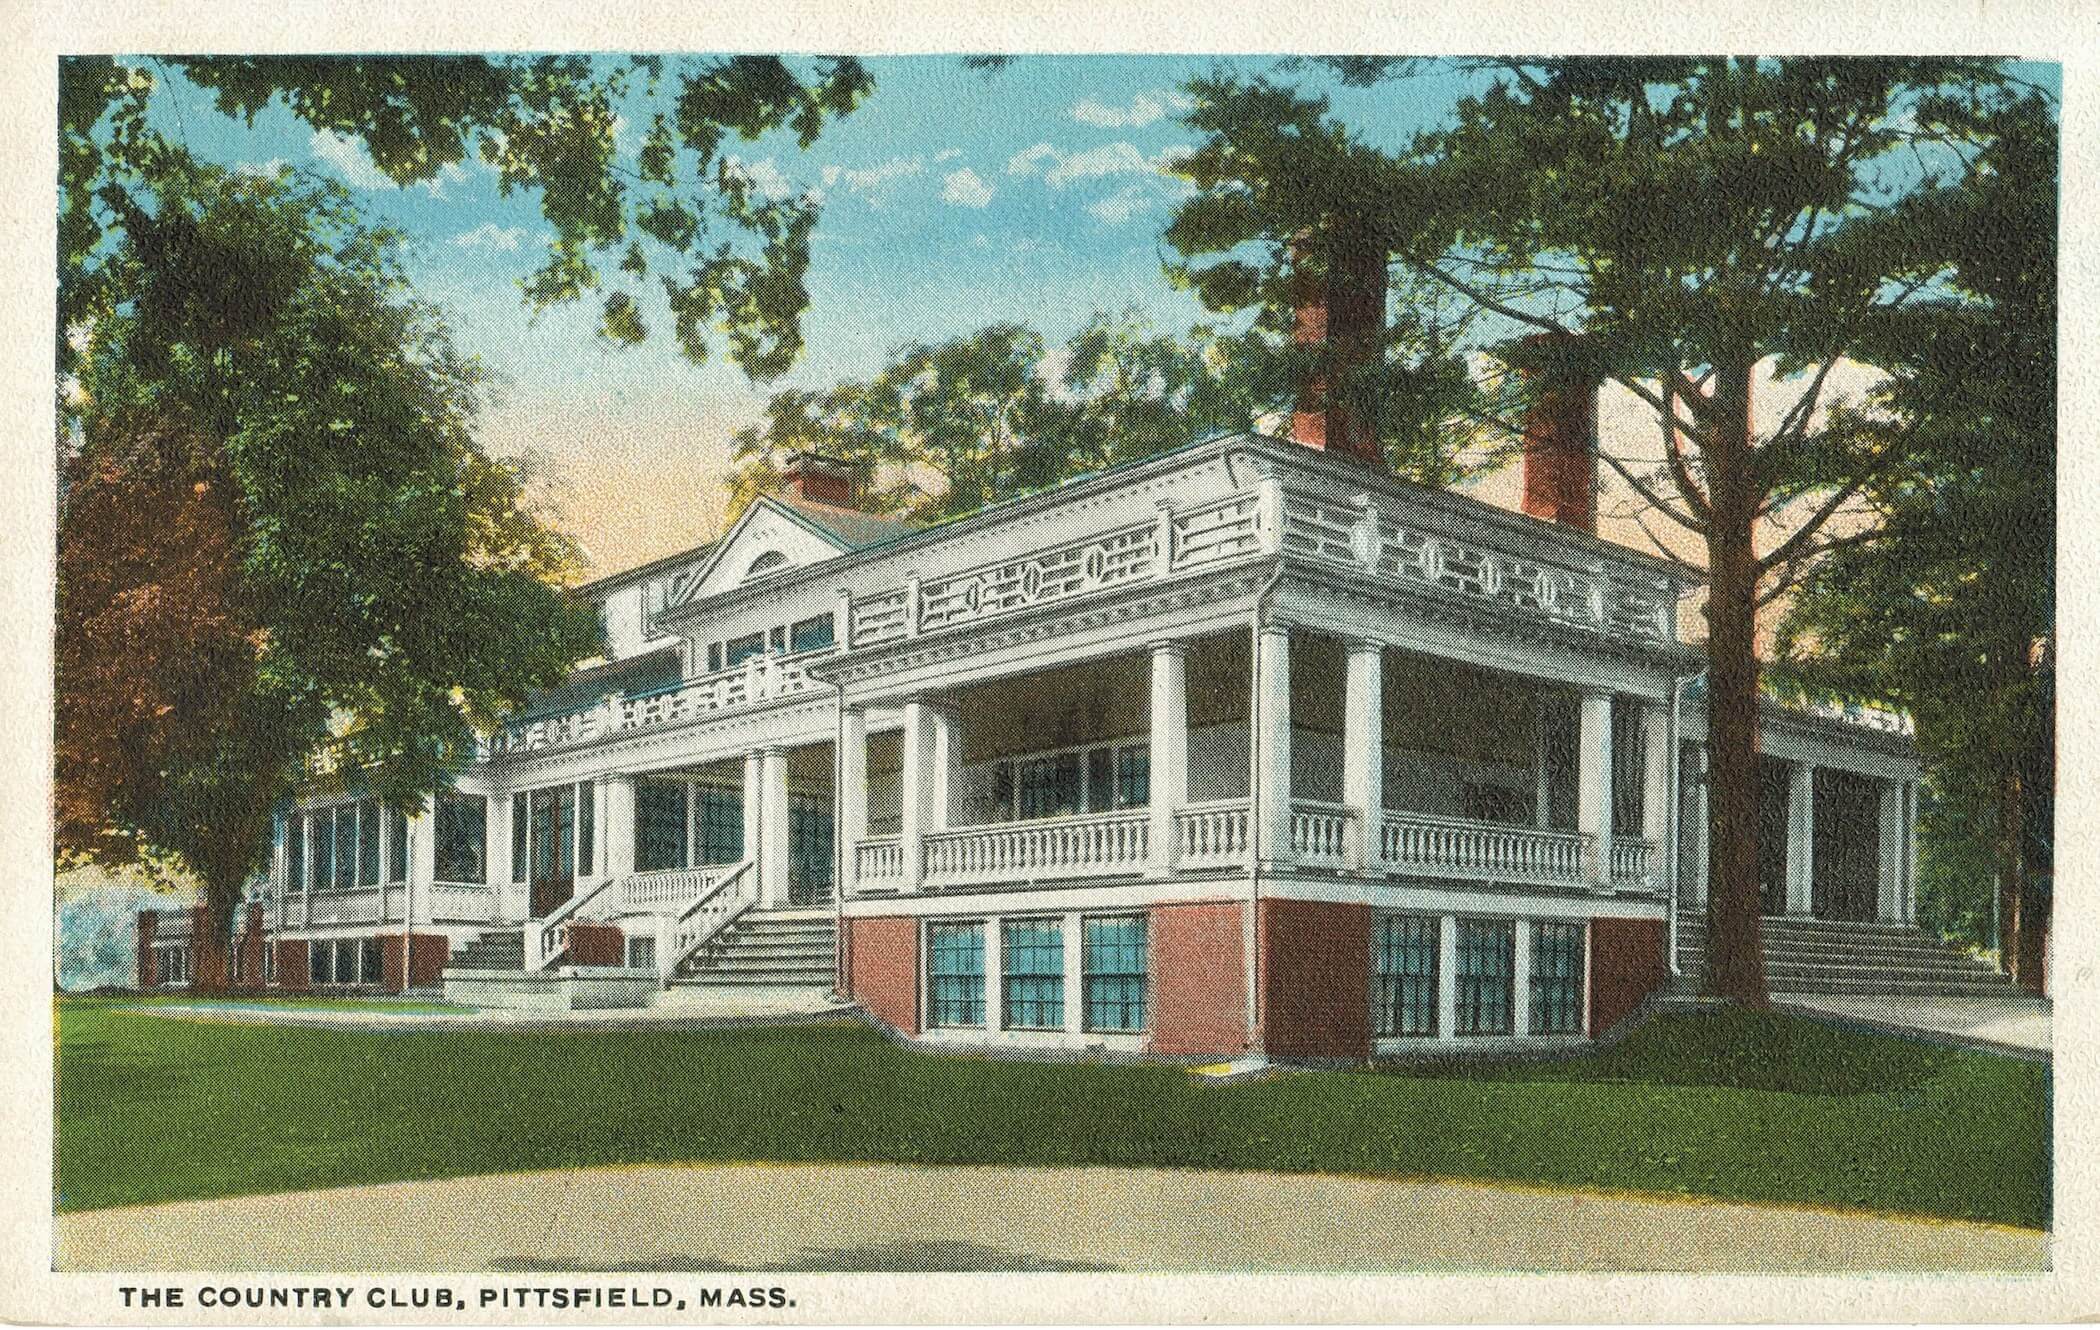 hand drawn and colored post card of the Country Club of Pittsfield